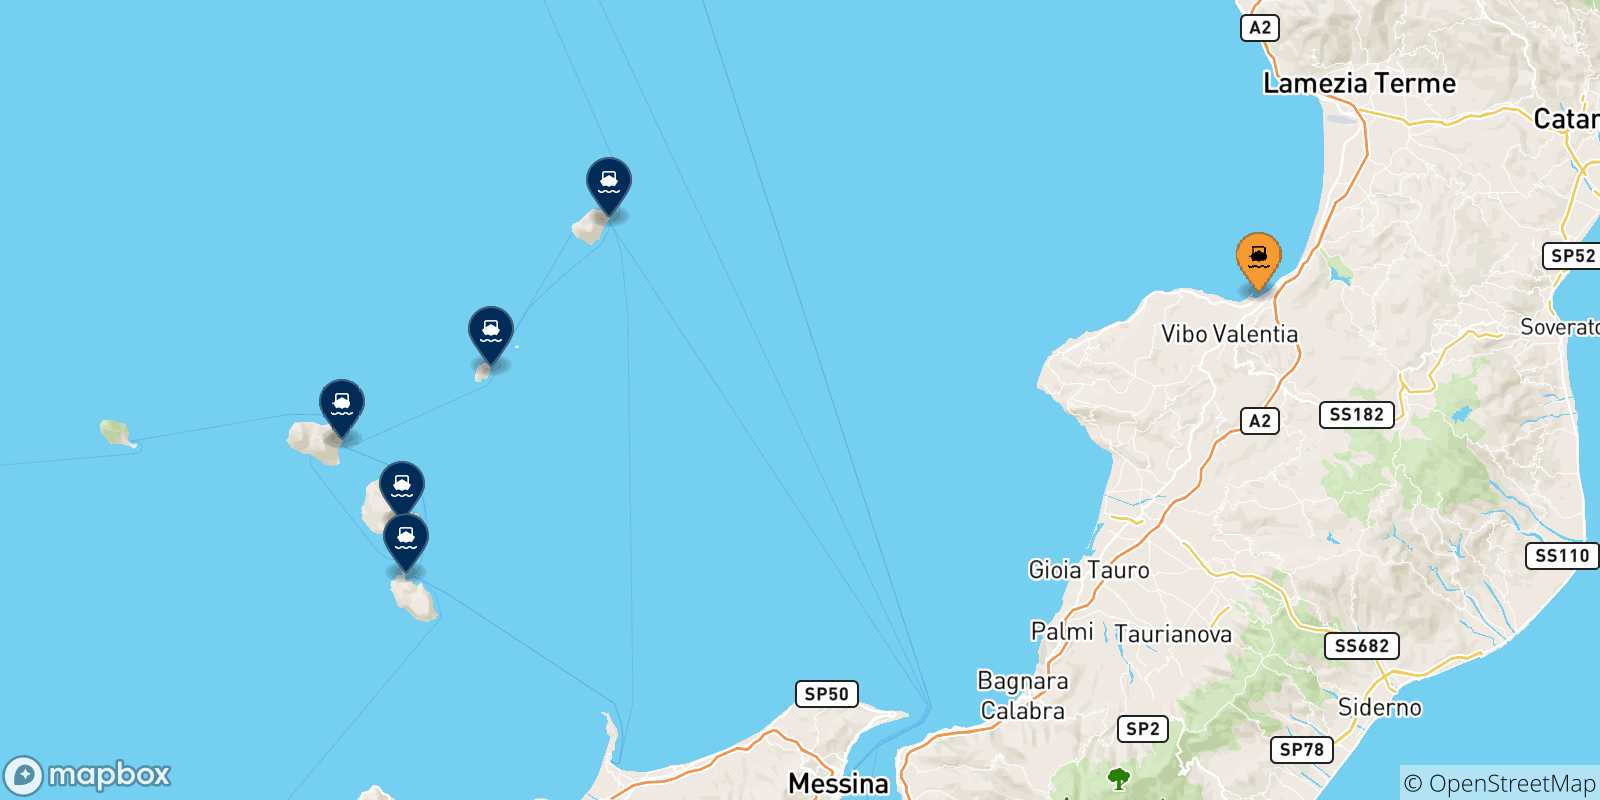 Map of the possible routes between Vibo Valentia and Aeolian Islands